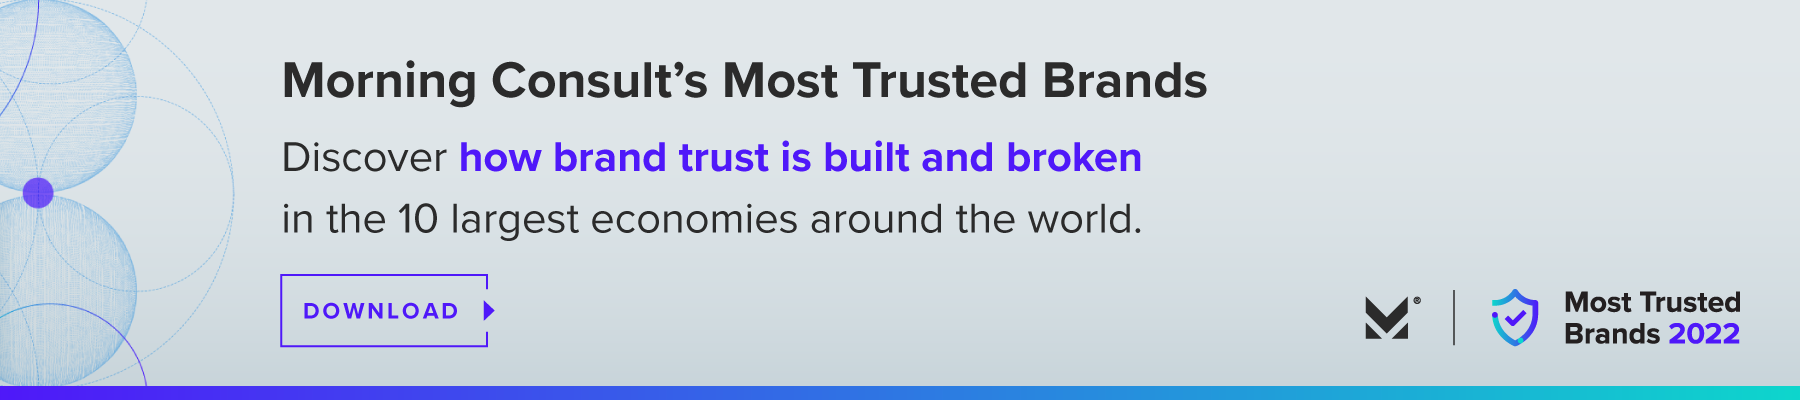 Most trusted brands 2022 report download